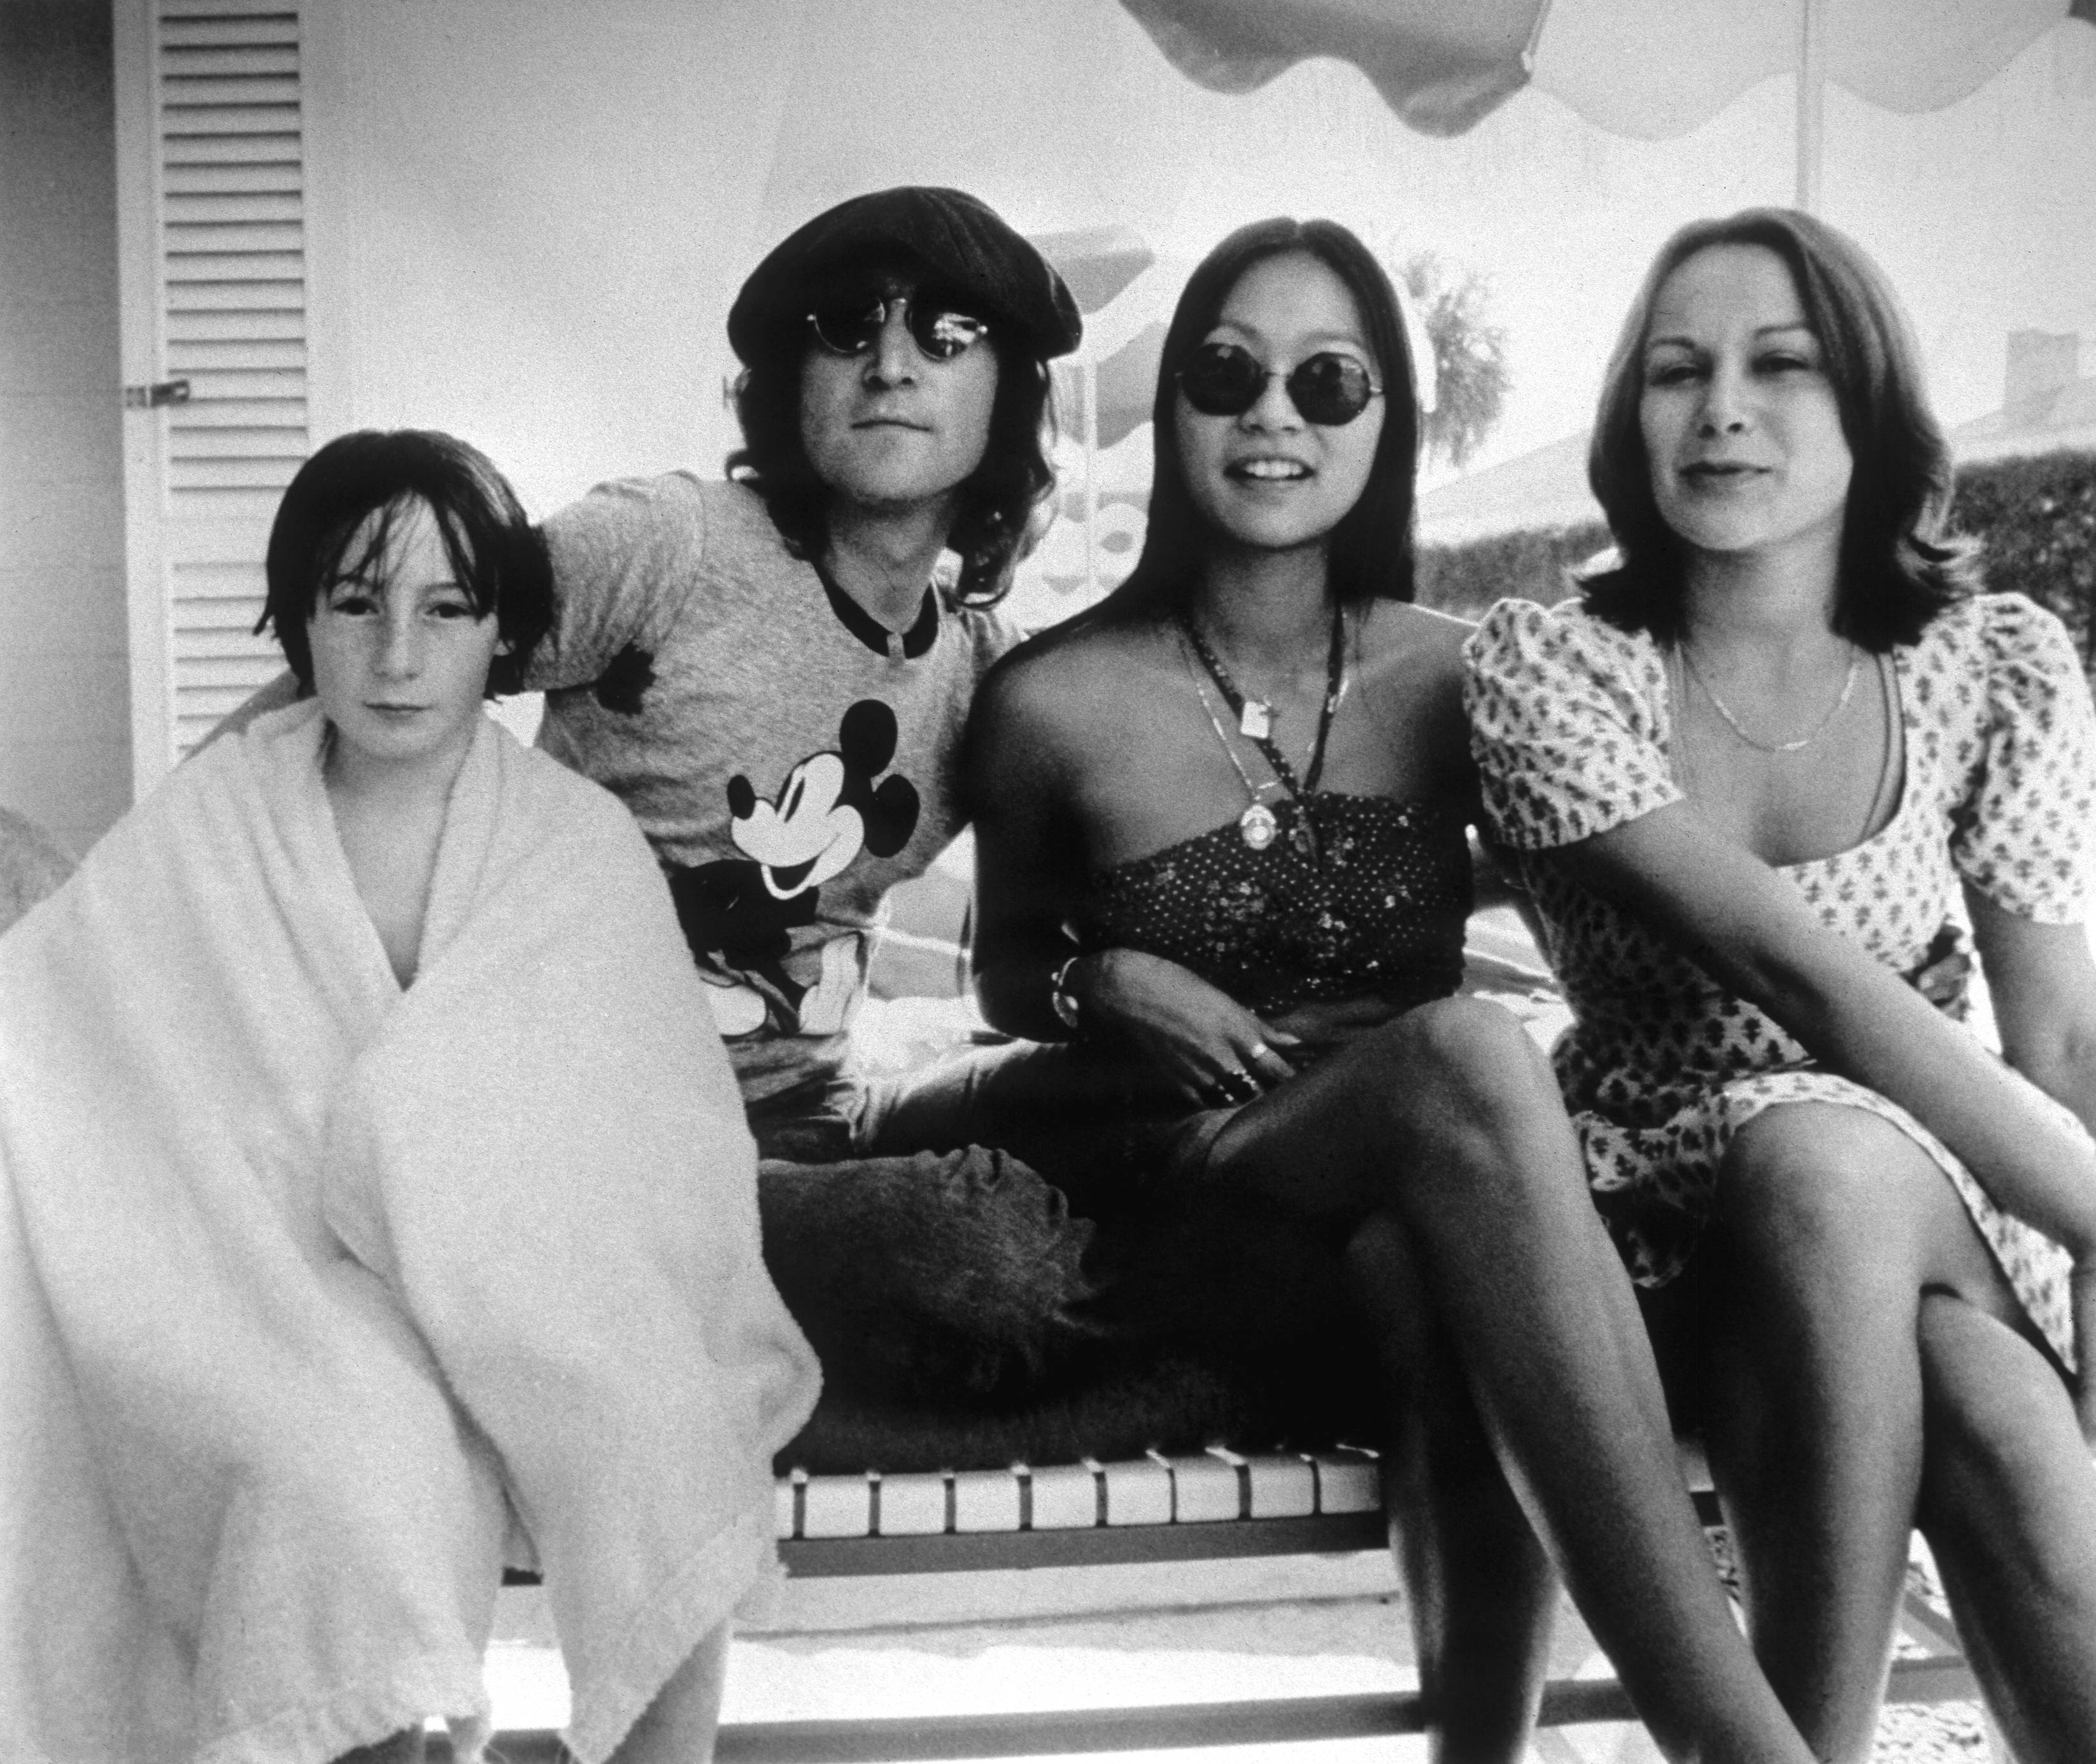 Julian Lennon, John Lennon, May Pang, and another woman on a seat